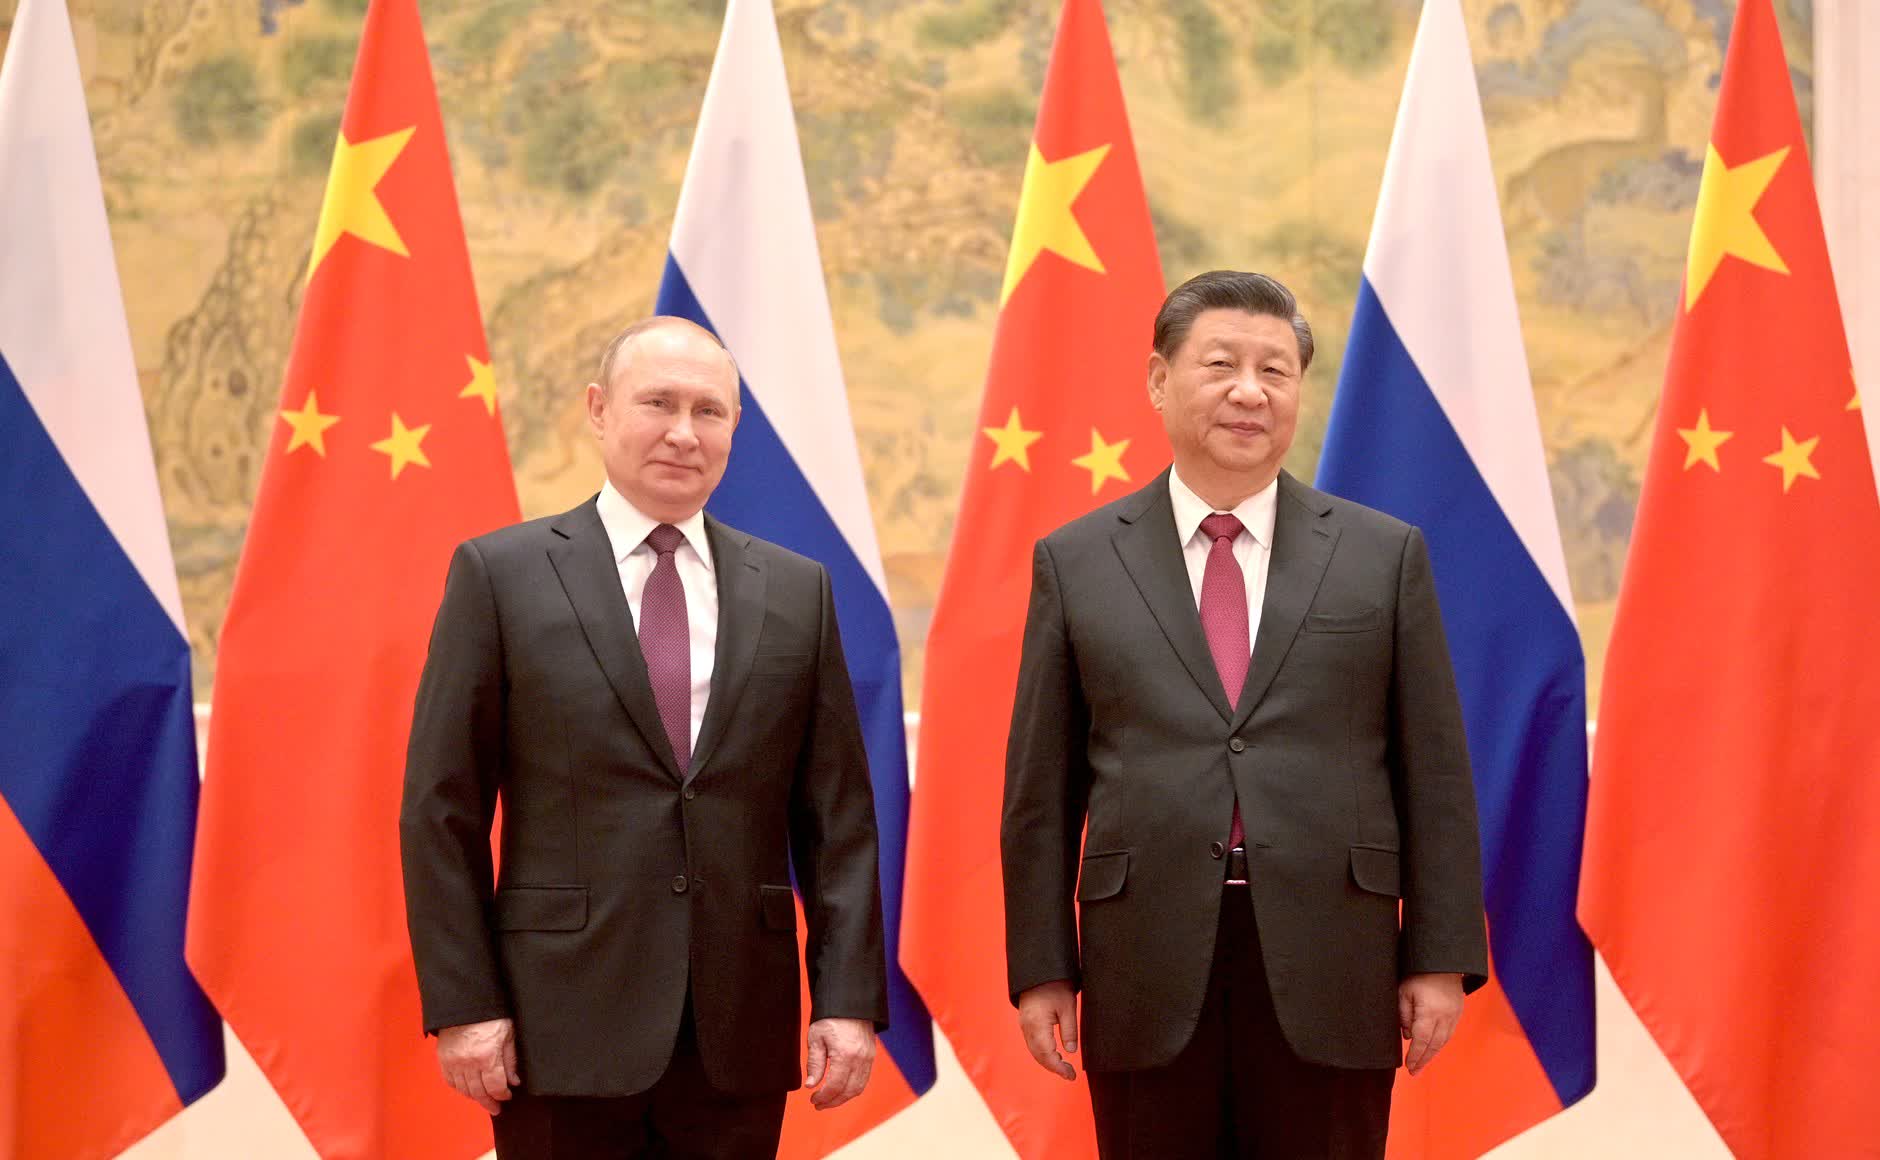 Russia and China want to become world leaders in tech, security, and AI